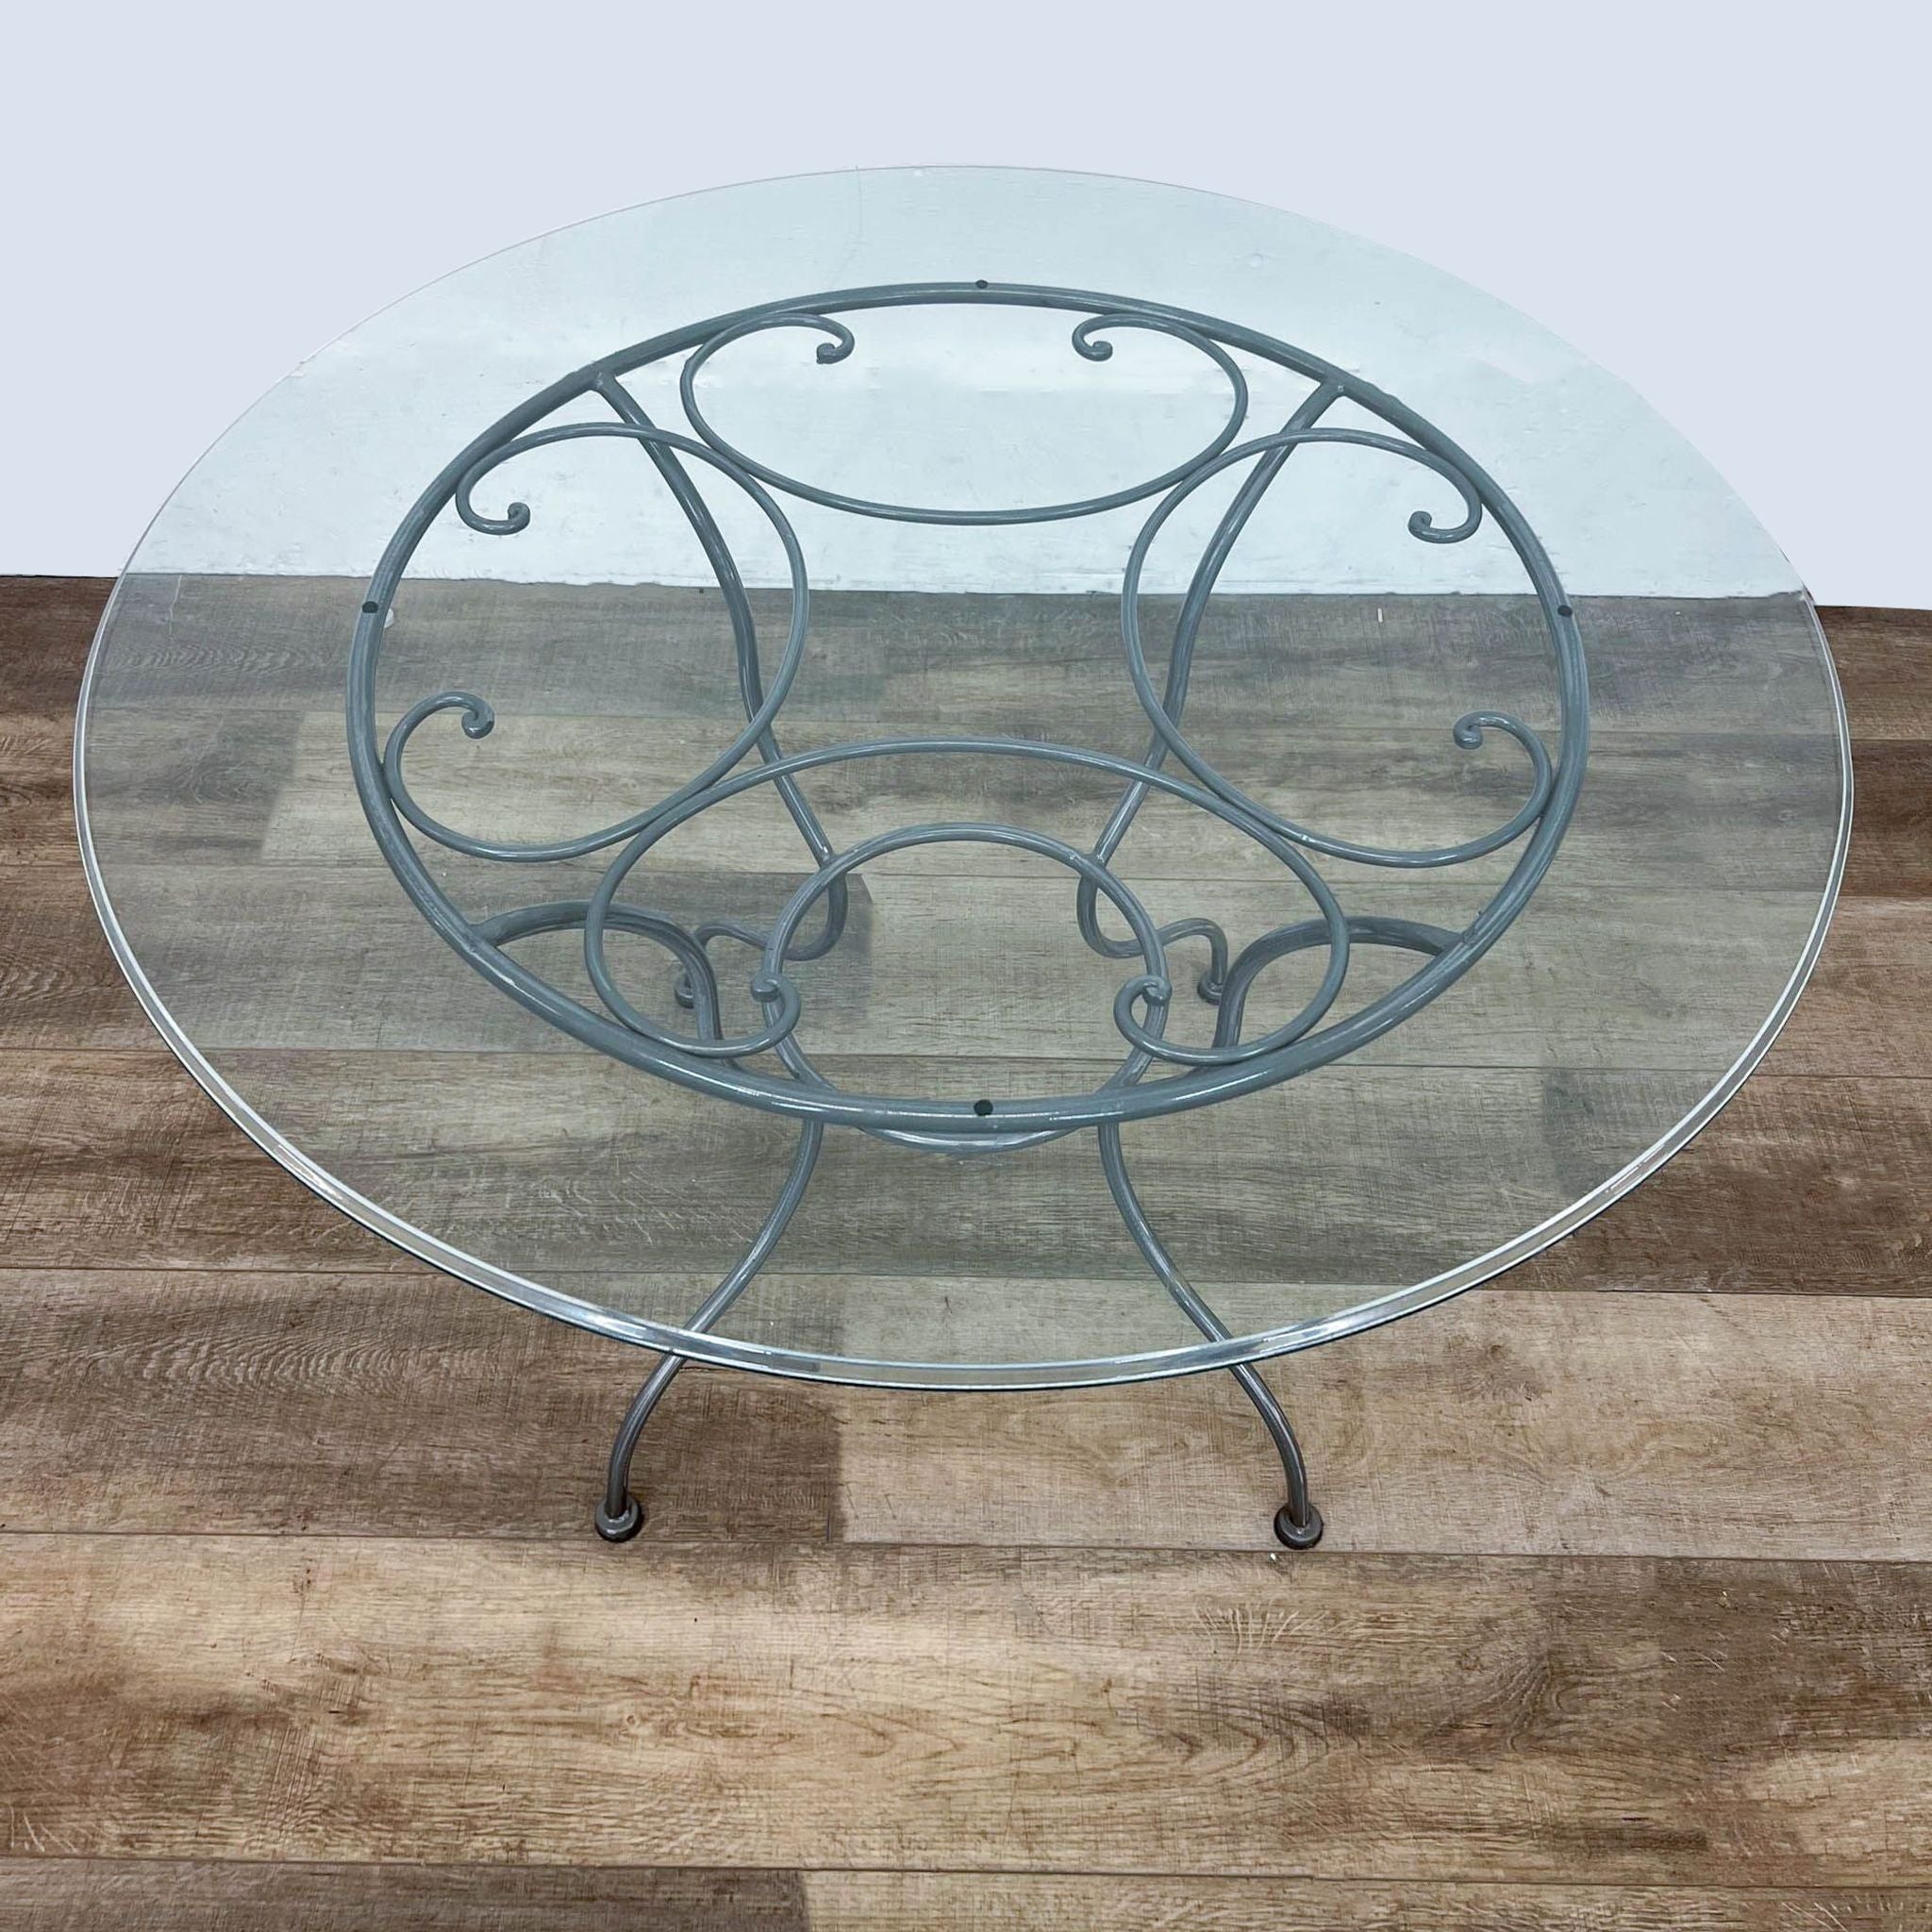 Round glass Reperch dining table with ornate powder-coated metal base, top view on a wooden floor.